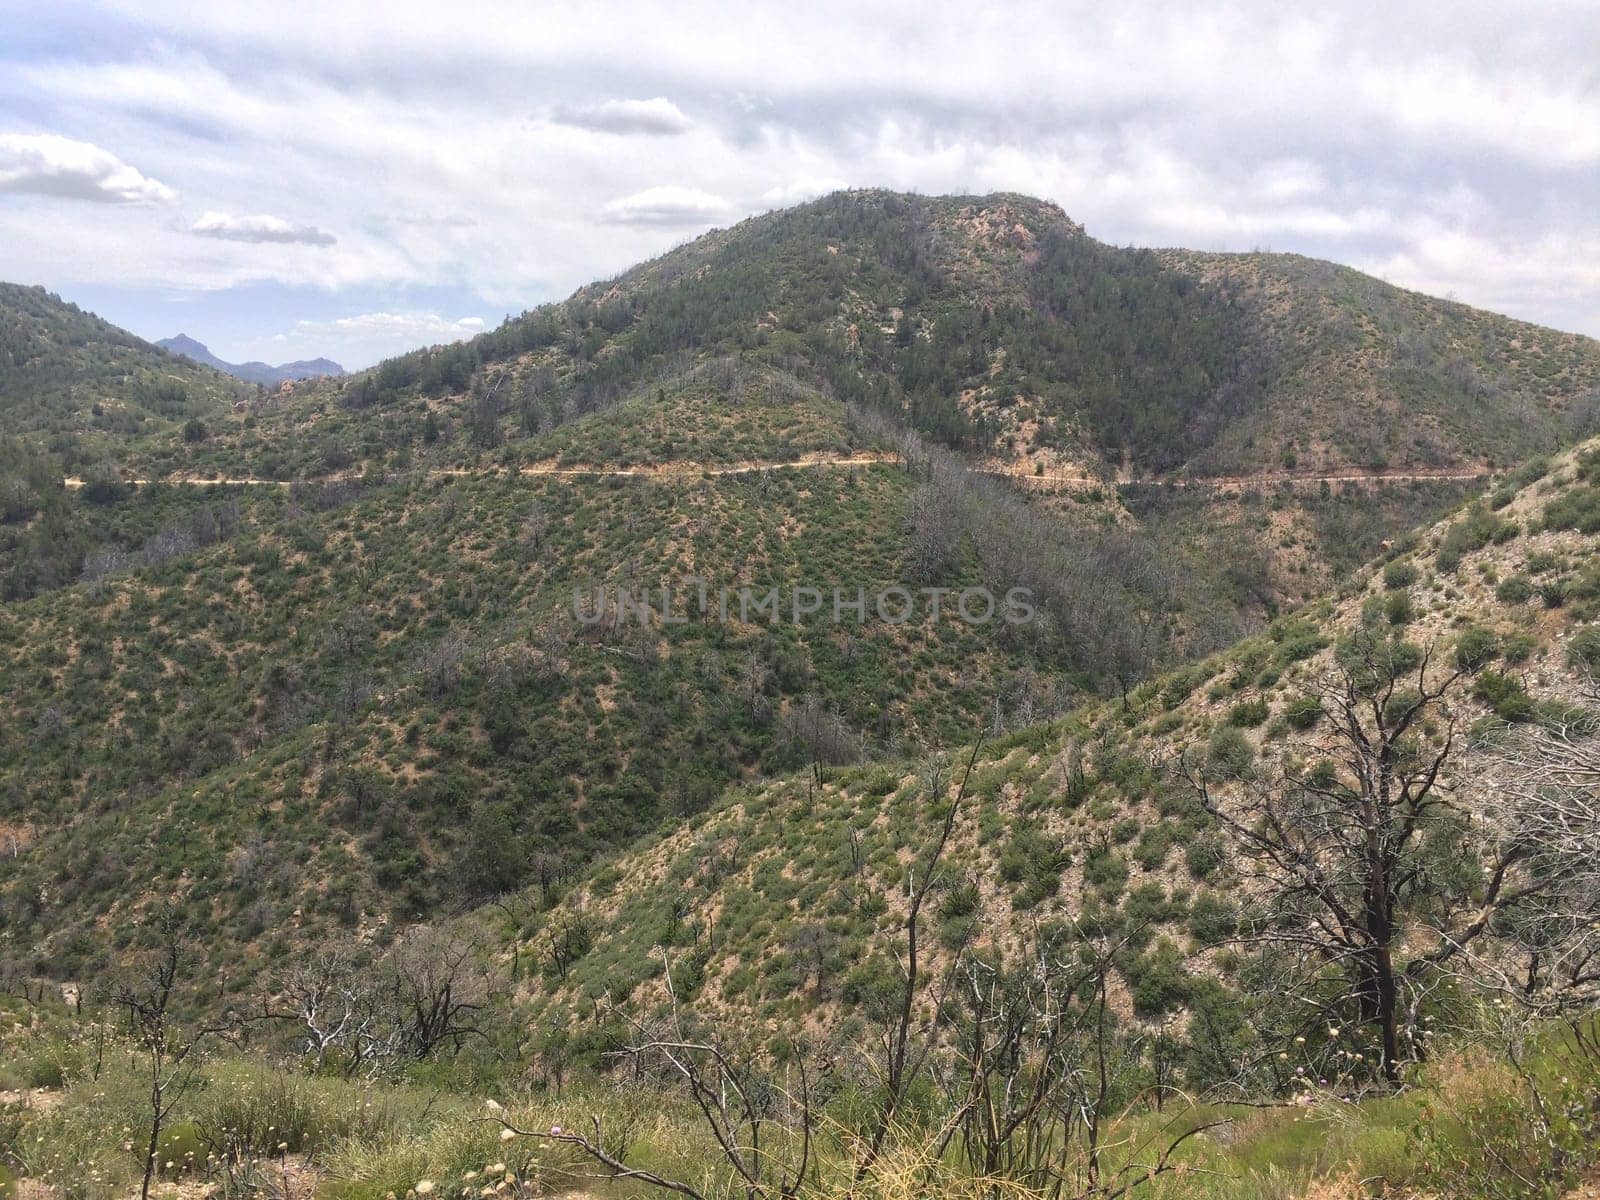 View of an Old Shelf Road Cut into a Mountainside in Arizona by grumblytumbleweed